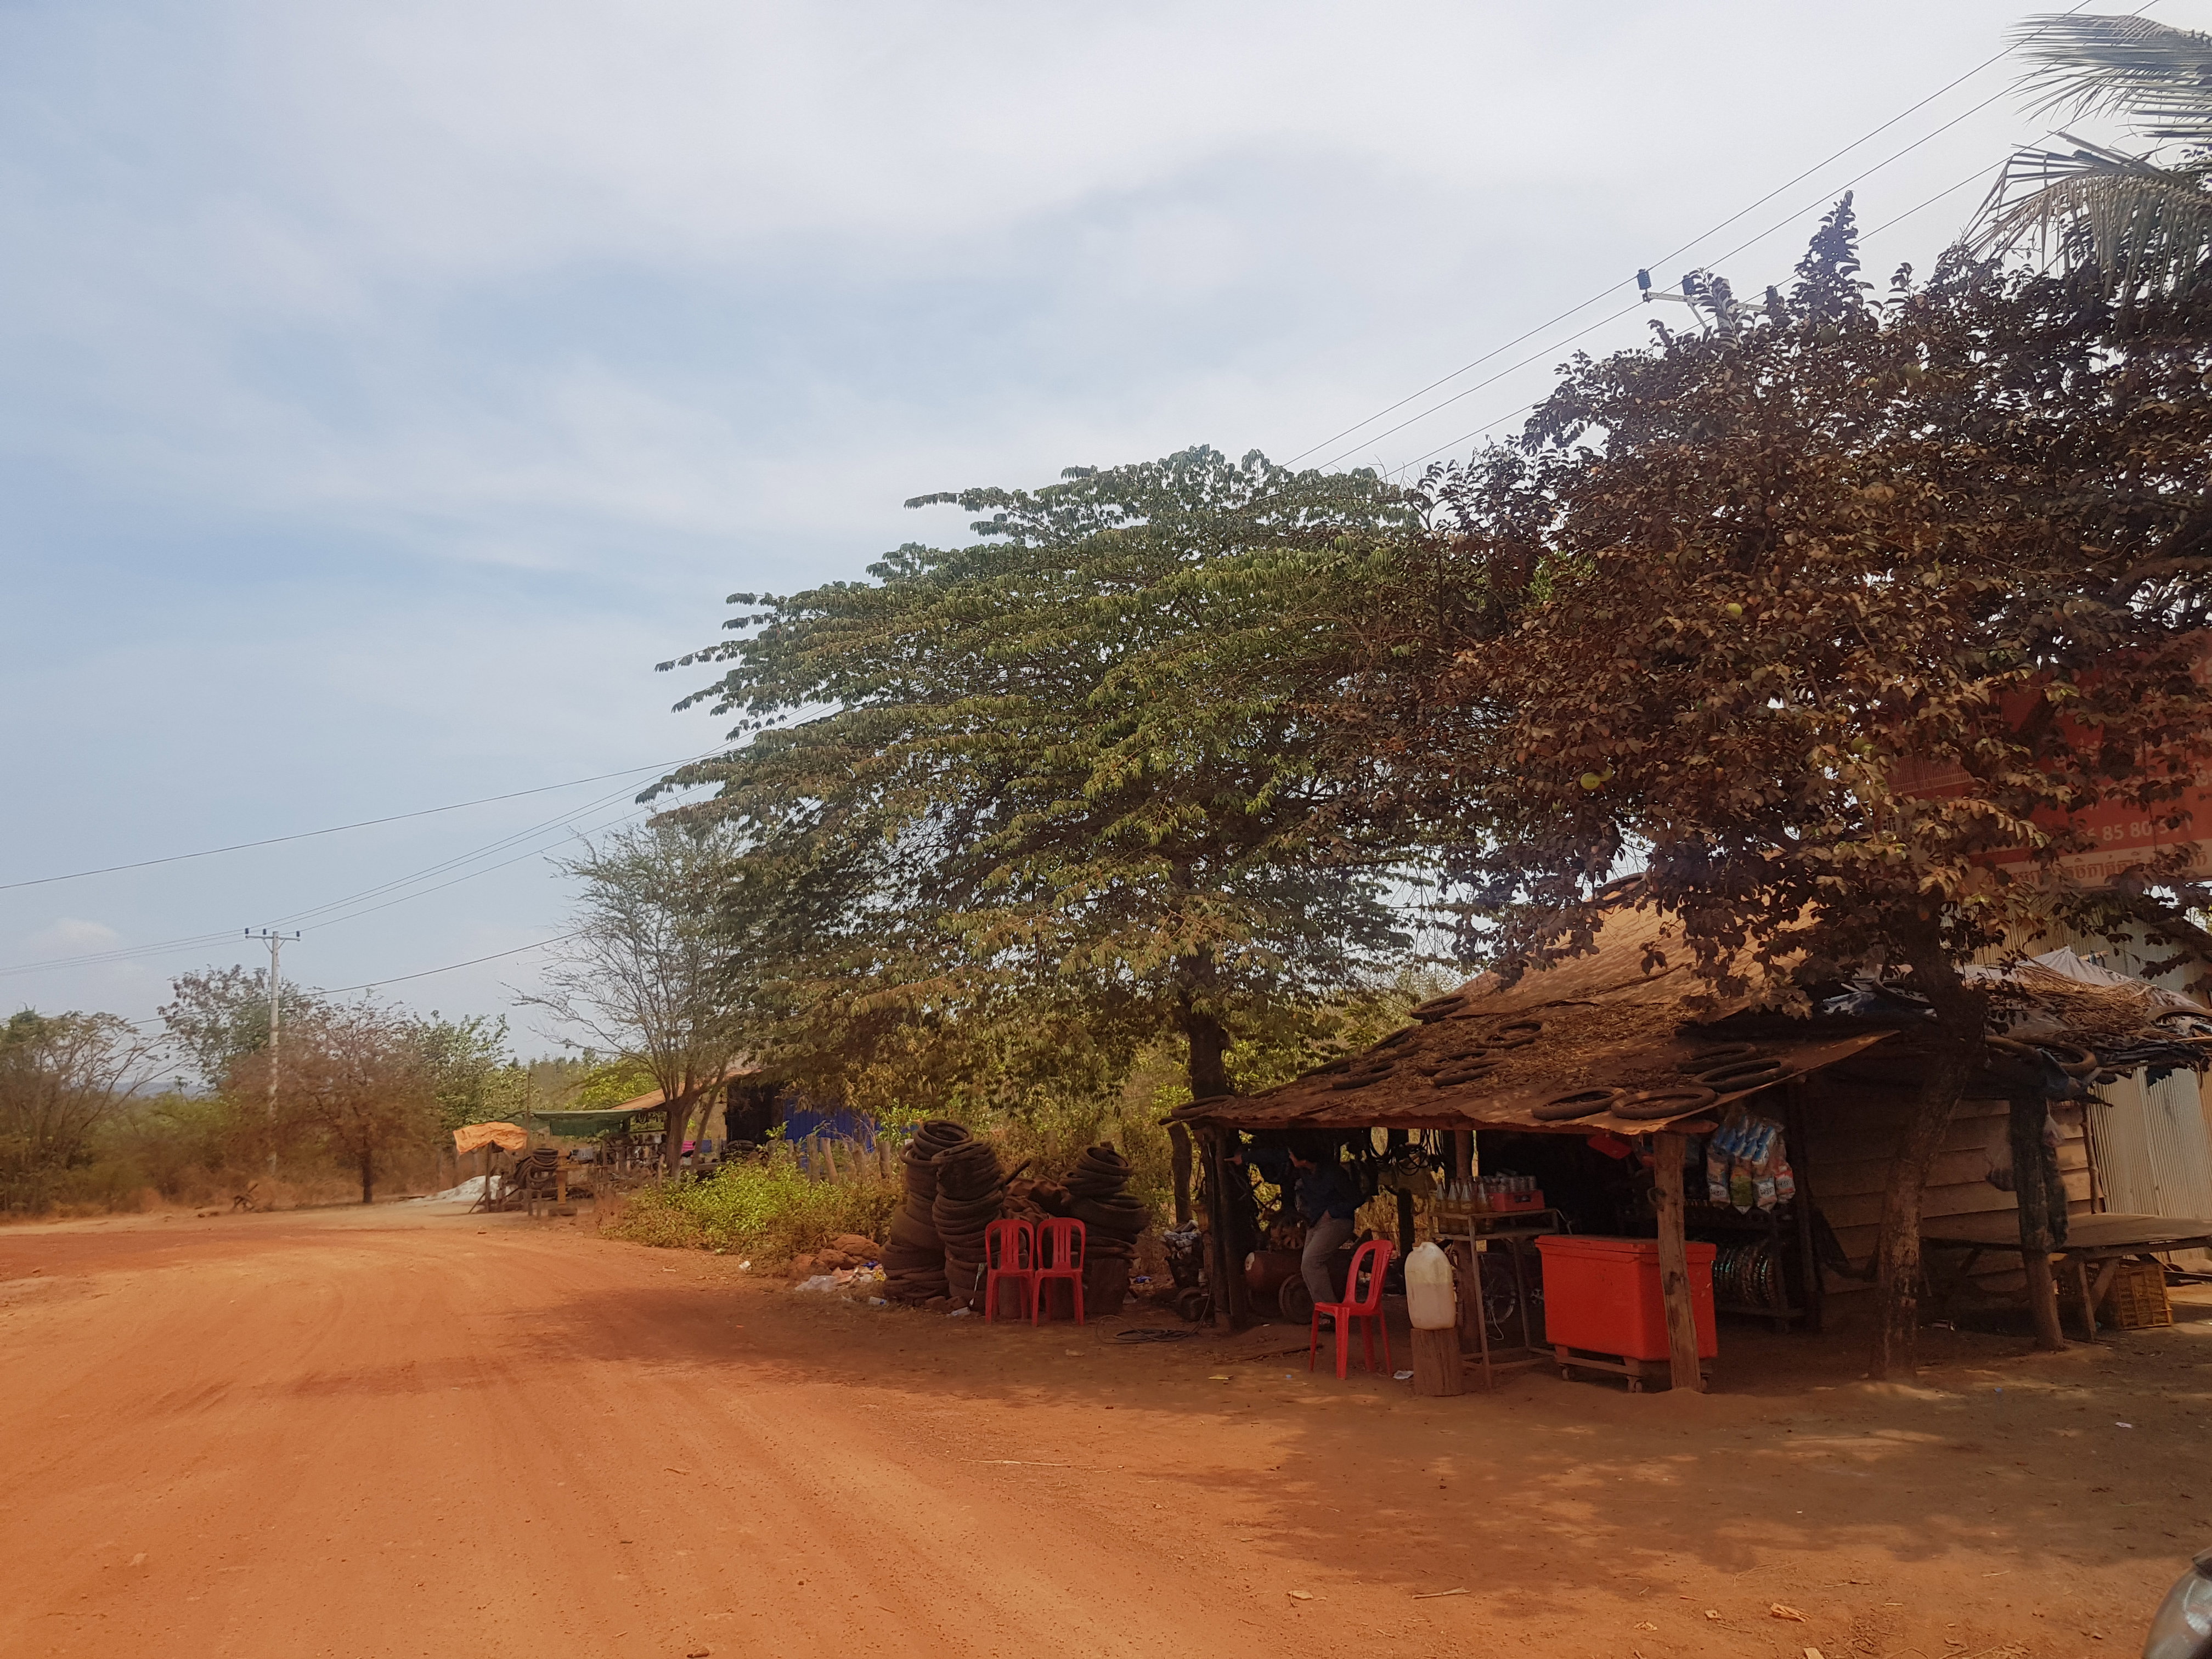 Two market shops amongst trees on the side of a dirt road. 